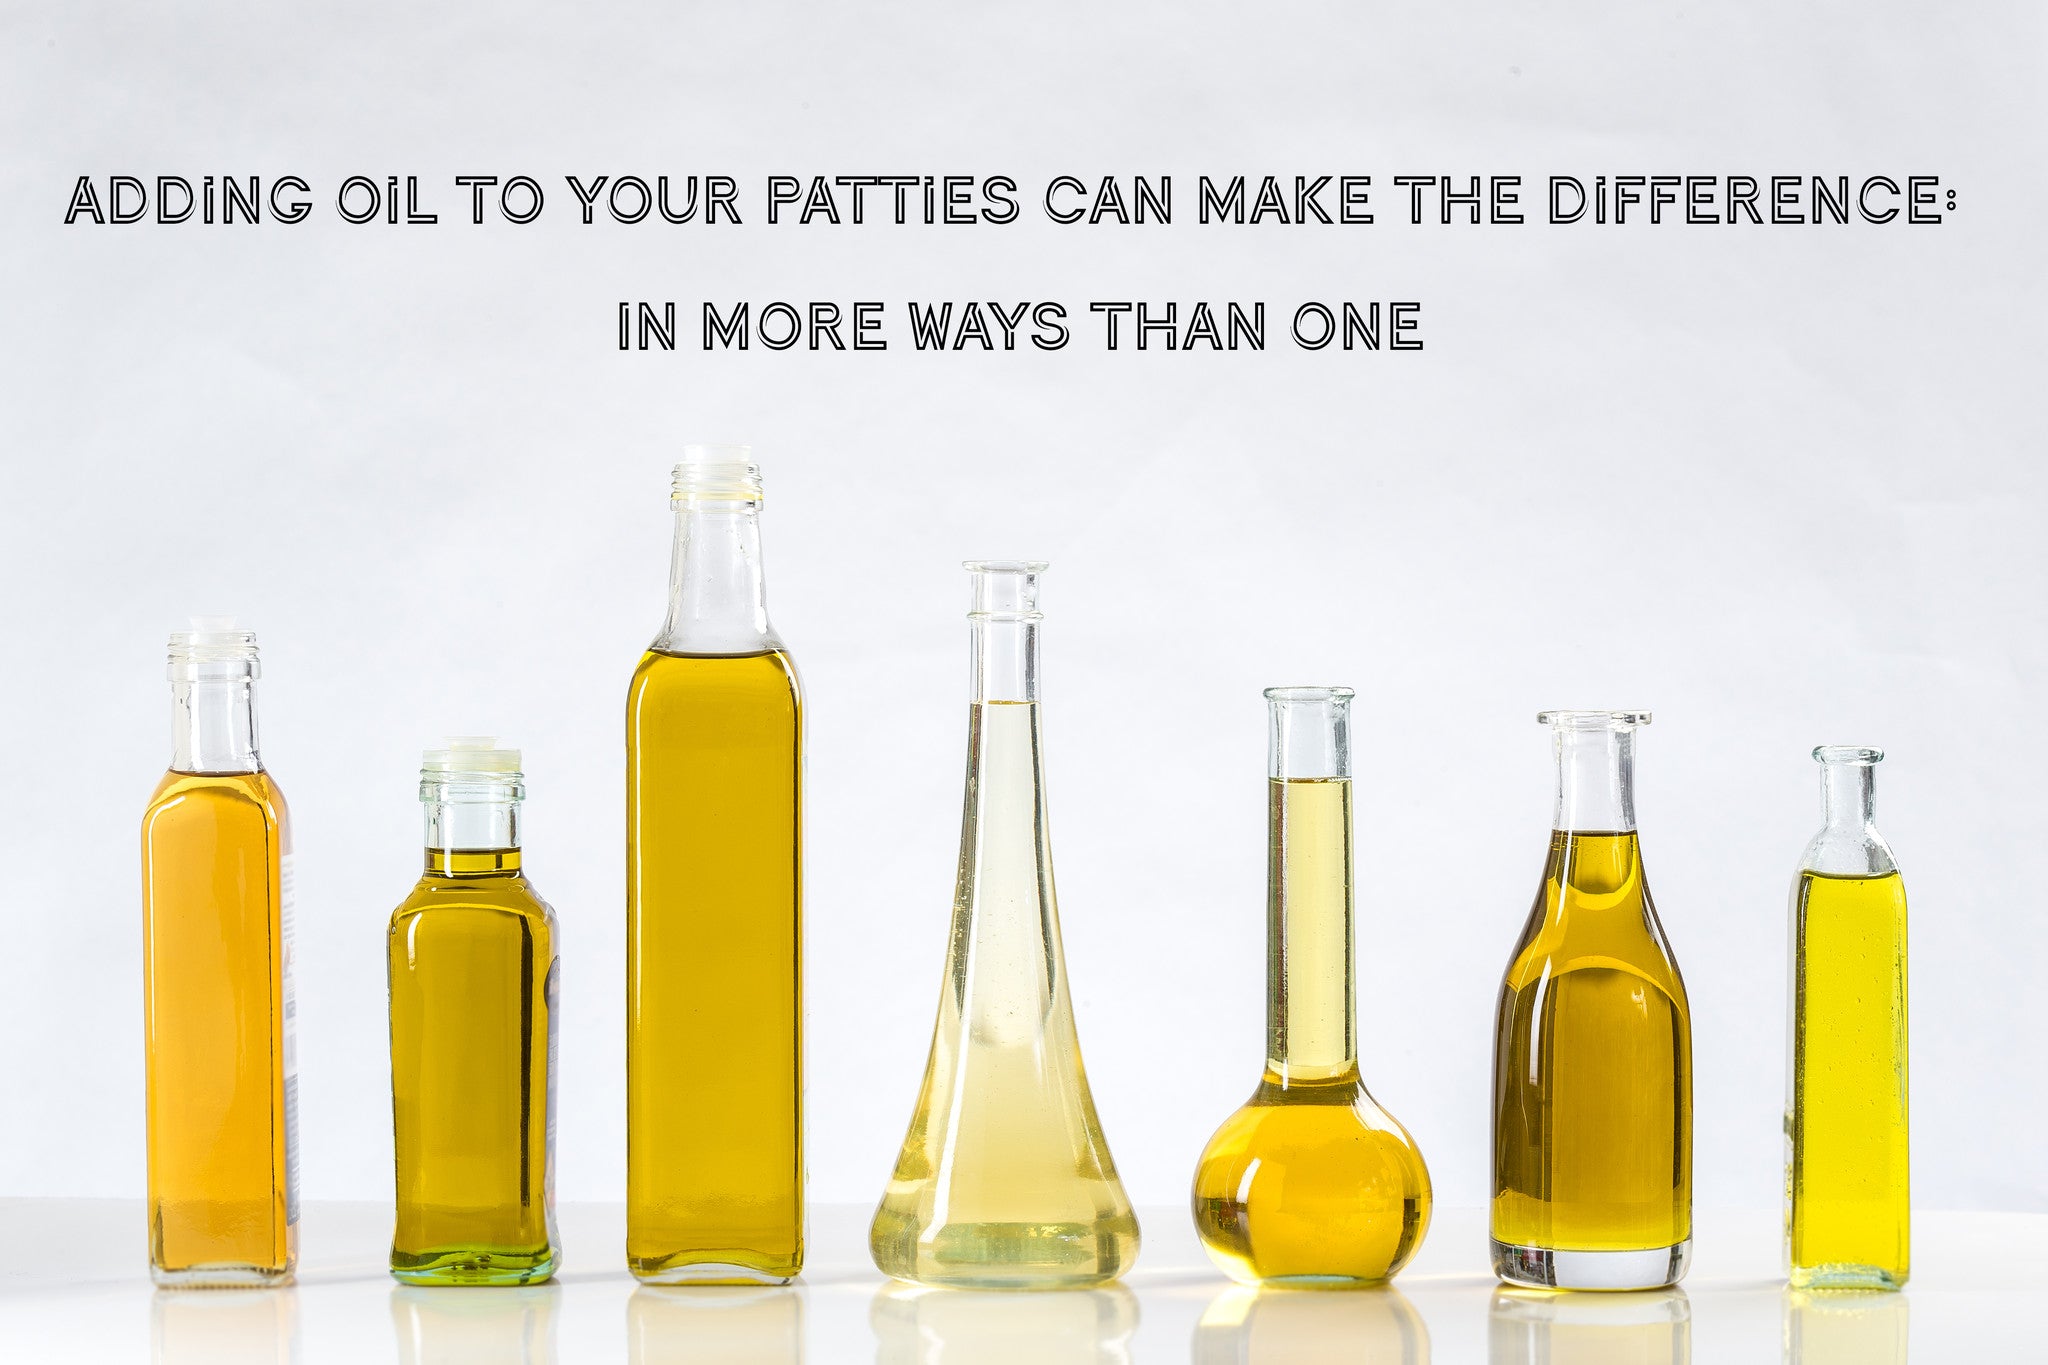 Adding oil to your patties can make the difference: In more ways than one